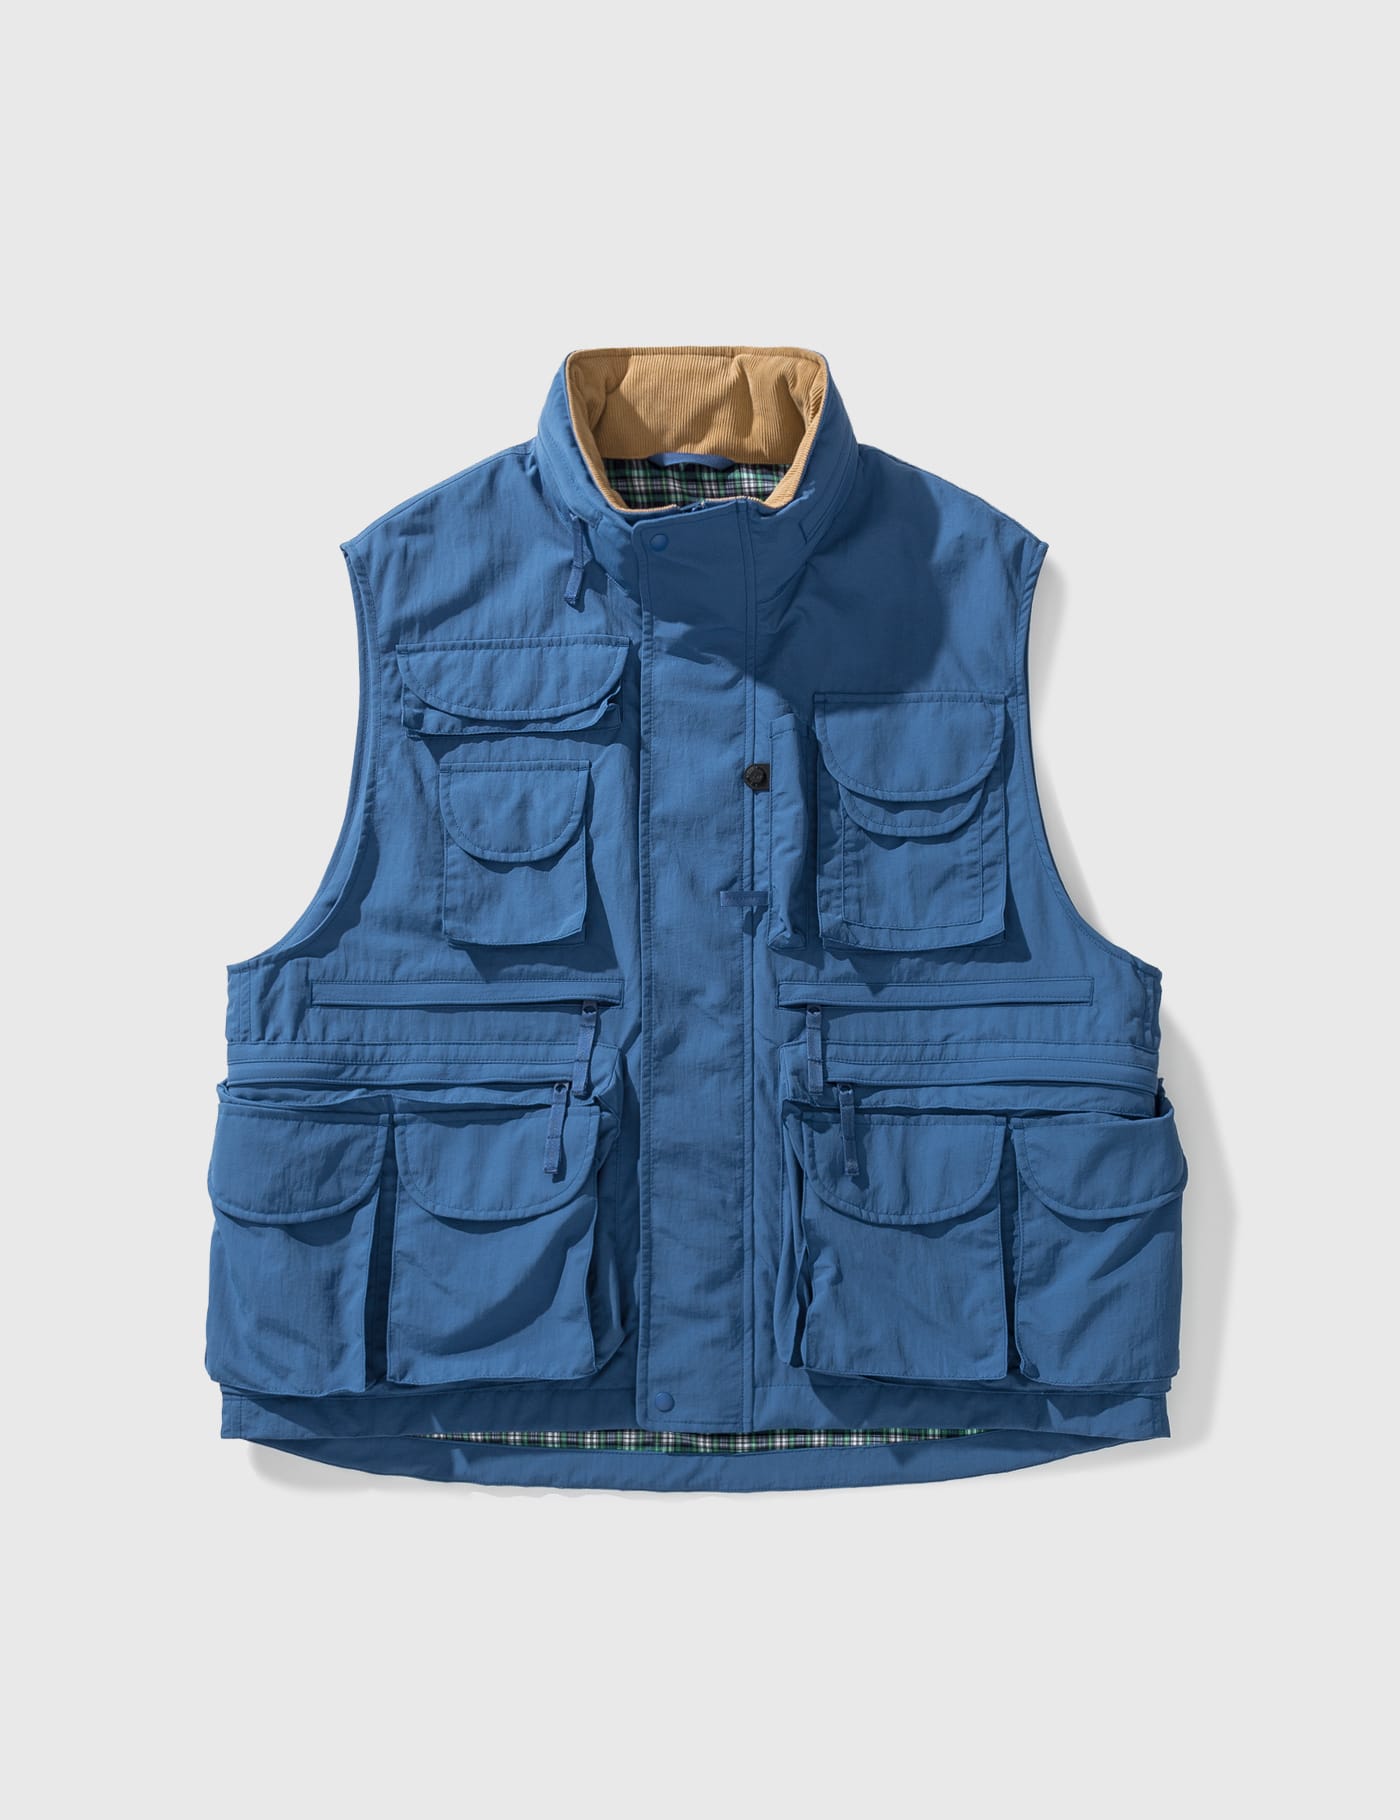 DAIWA PIER39 - Tech Parfect Fishing Vest | HBX - Globally Curated Fashion  and Lifestyle by Hypebeast